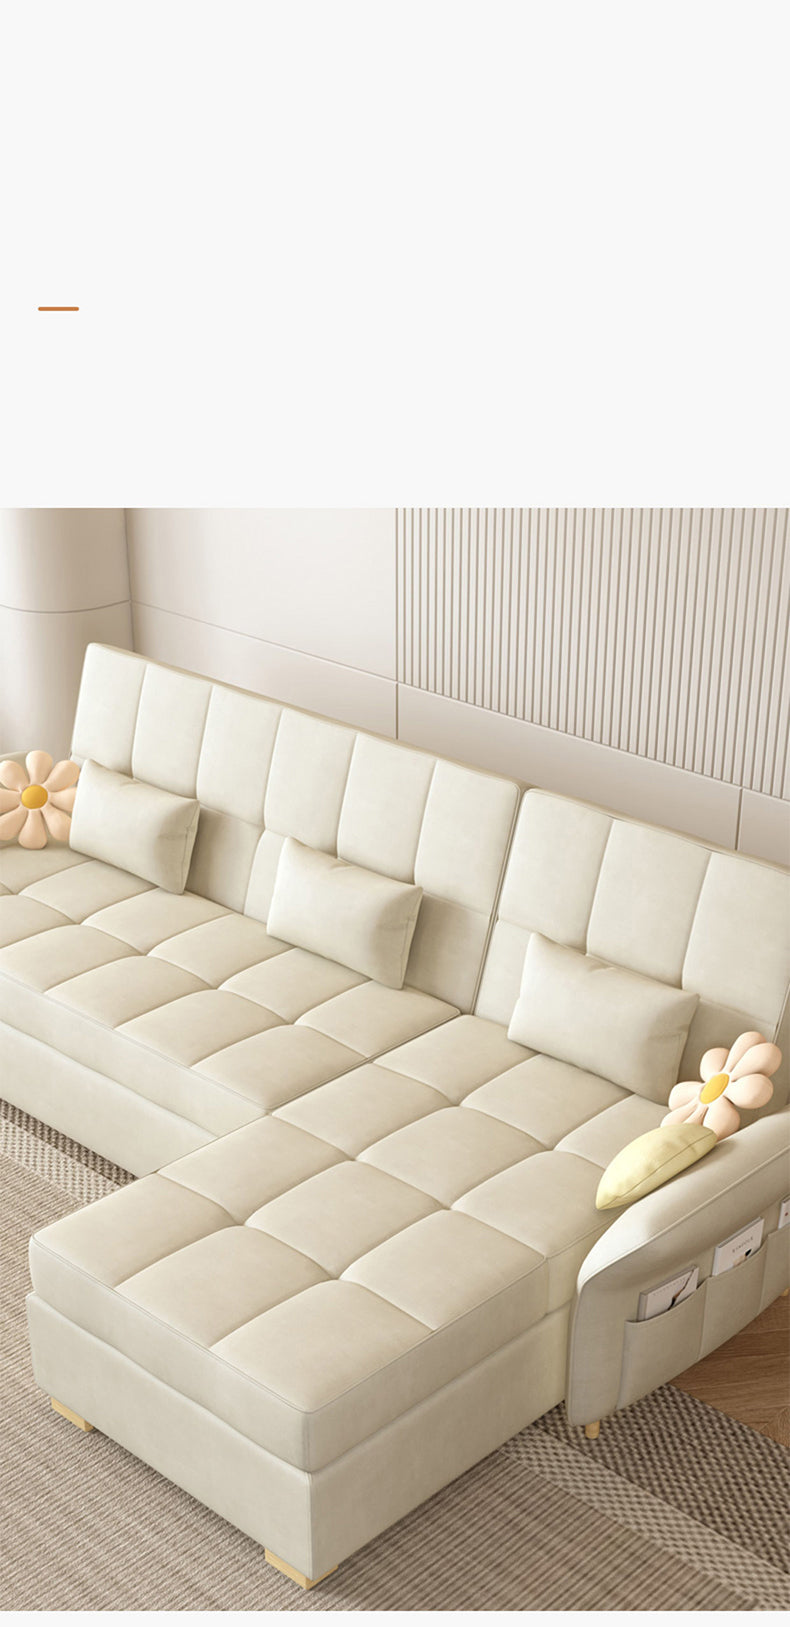 Luxurious Multi-Color Techno Fabric Sofa Bed - Off White, Gray, Brown, Green, Blue & Brick Red Options fxgz-279